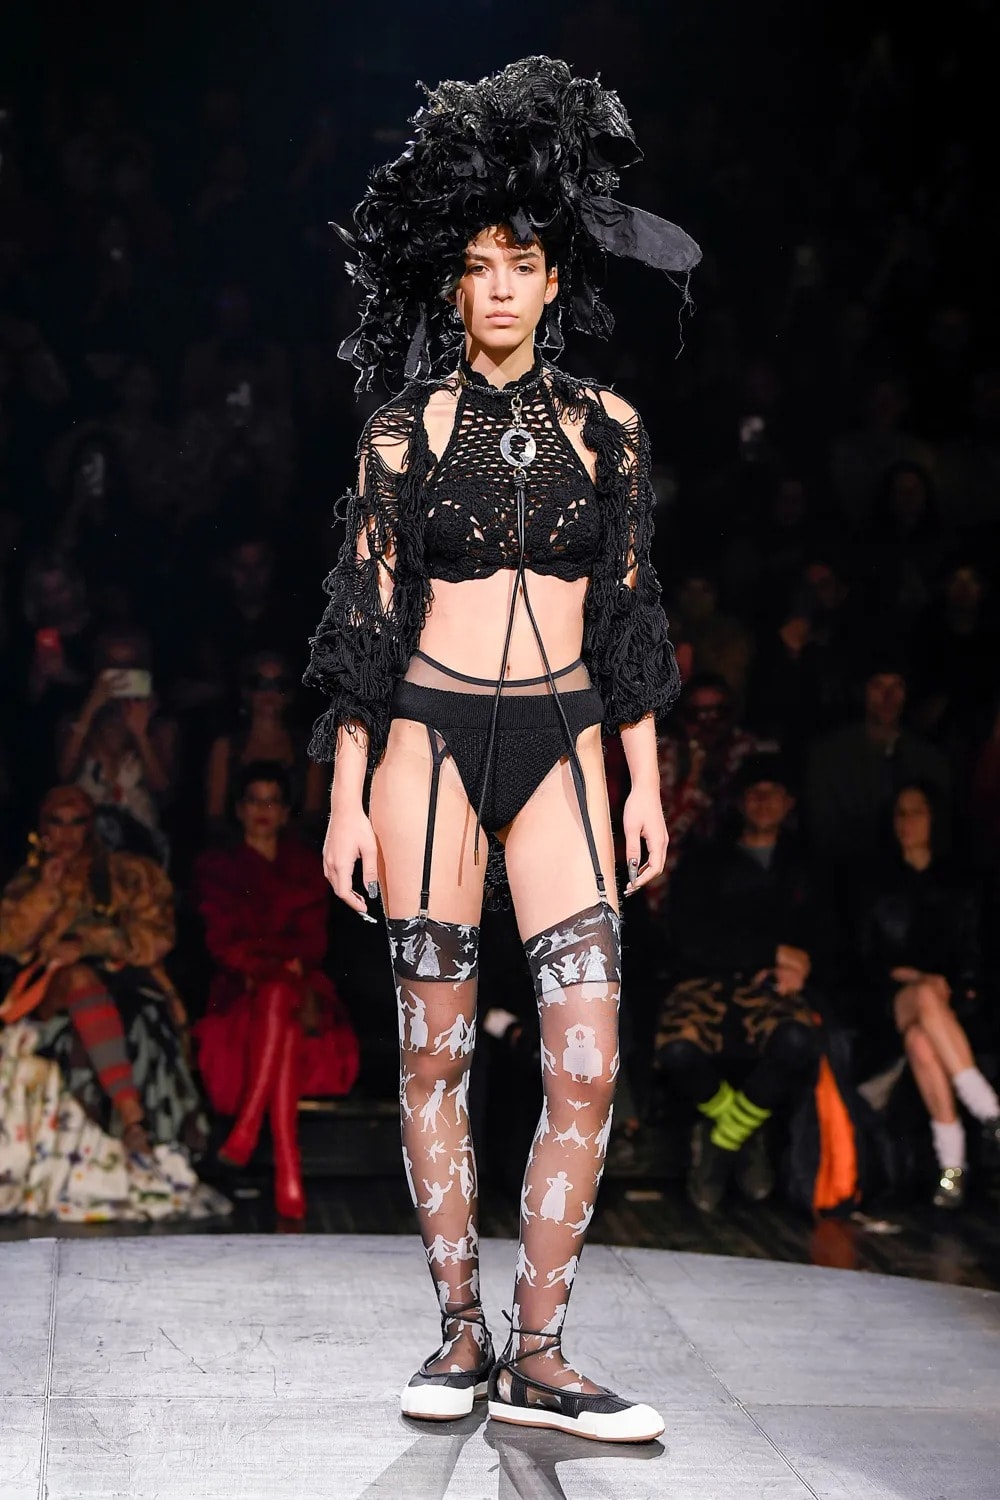 Image of MODEL DISPLAYS AN UNDERWEAR OUTFIT DESIGNED BY ANDRES